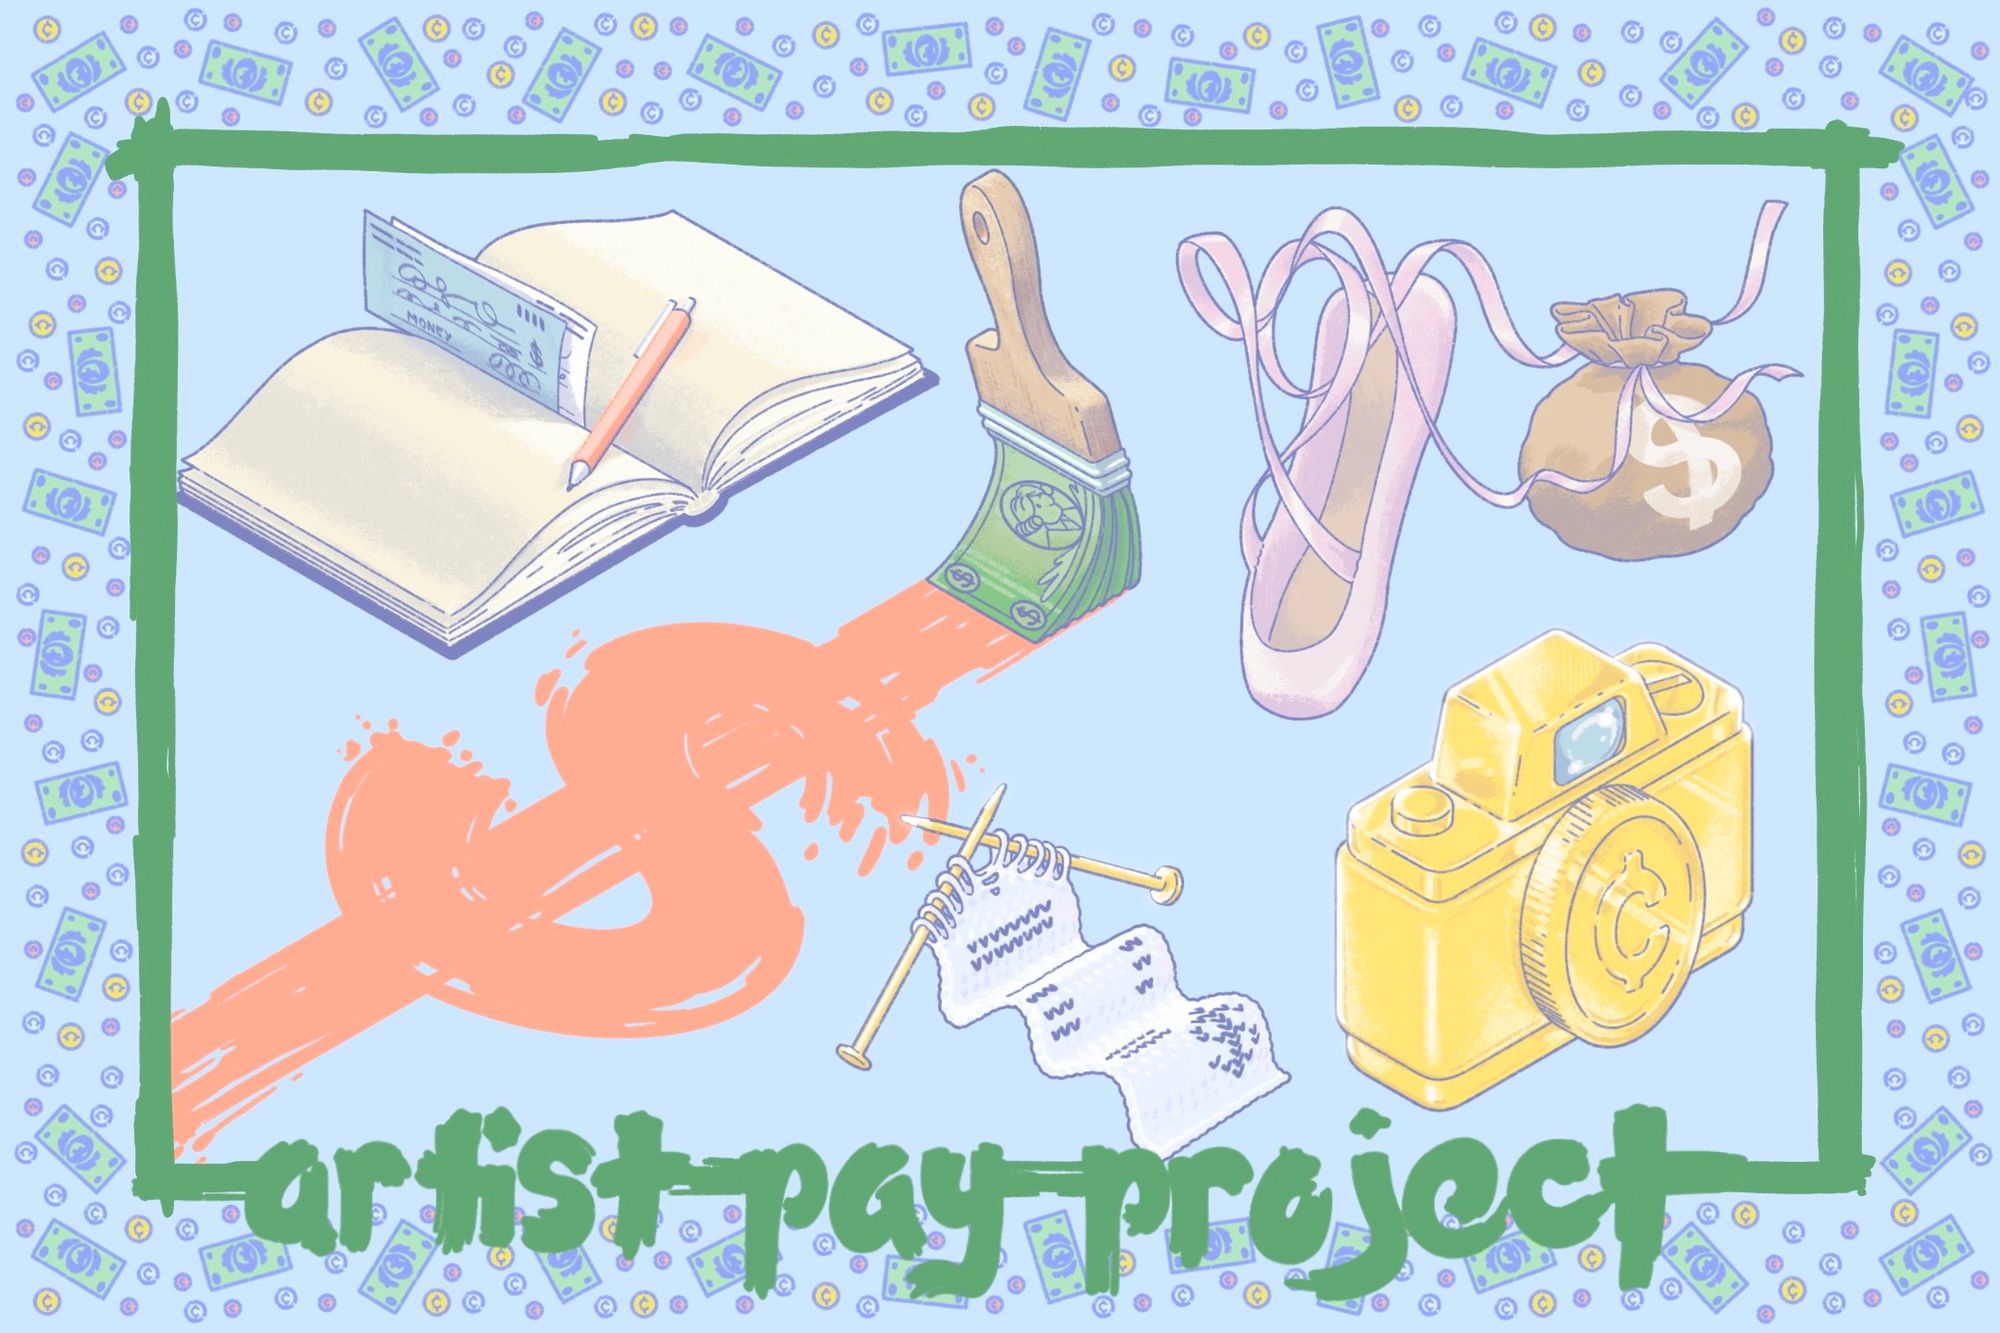 Illustrated image showing a book with a check inside, a dollar sign painted, ballet slippers, with a money bag attached.